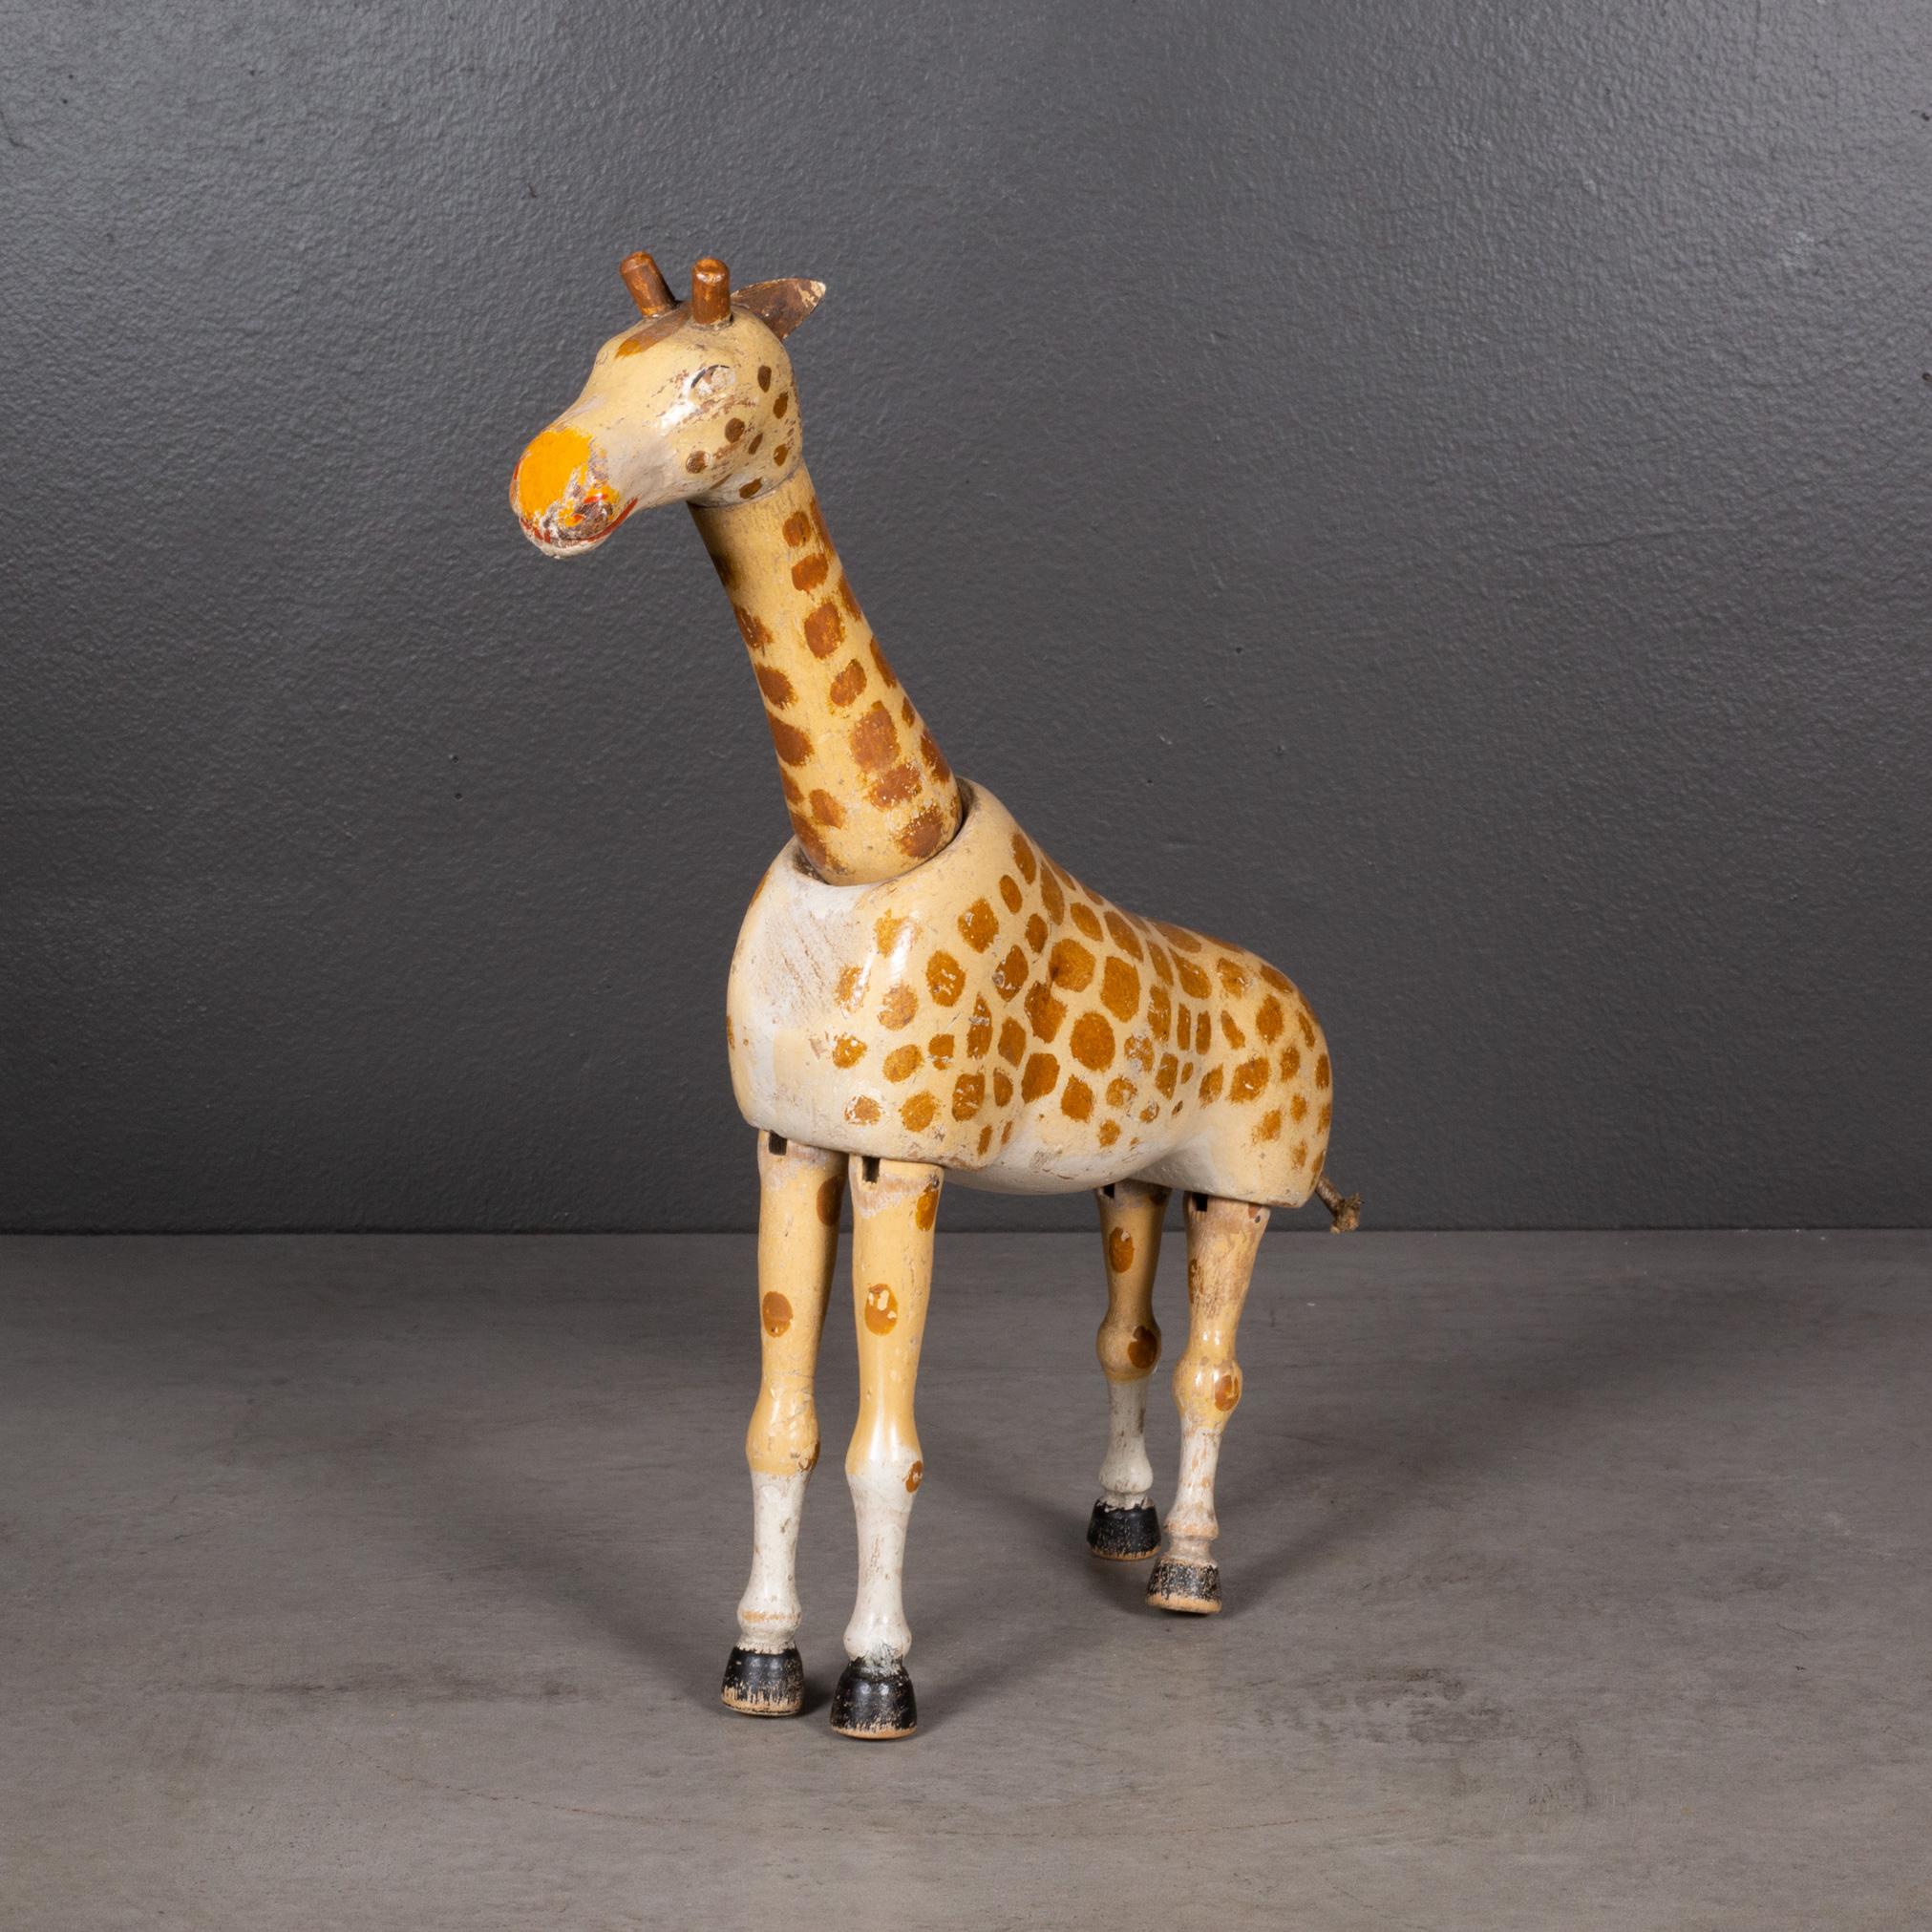 ABOUT

Jointed wooden giraffe manufactured in the 1900s by the Schoenhut Piano Company as part of the Humpty Dumpty Circus collection. Made from carved wood with original hand painted finish and articulated joints for posing. Glass eyes and leather